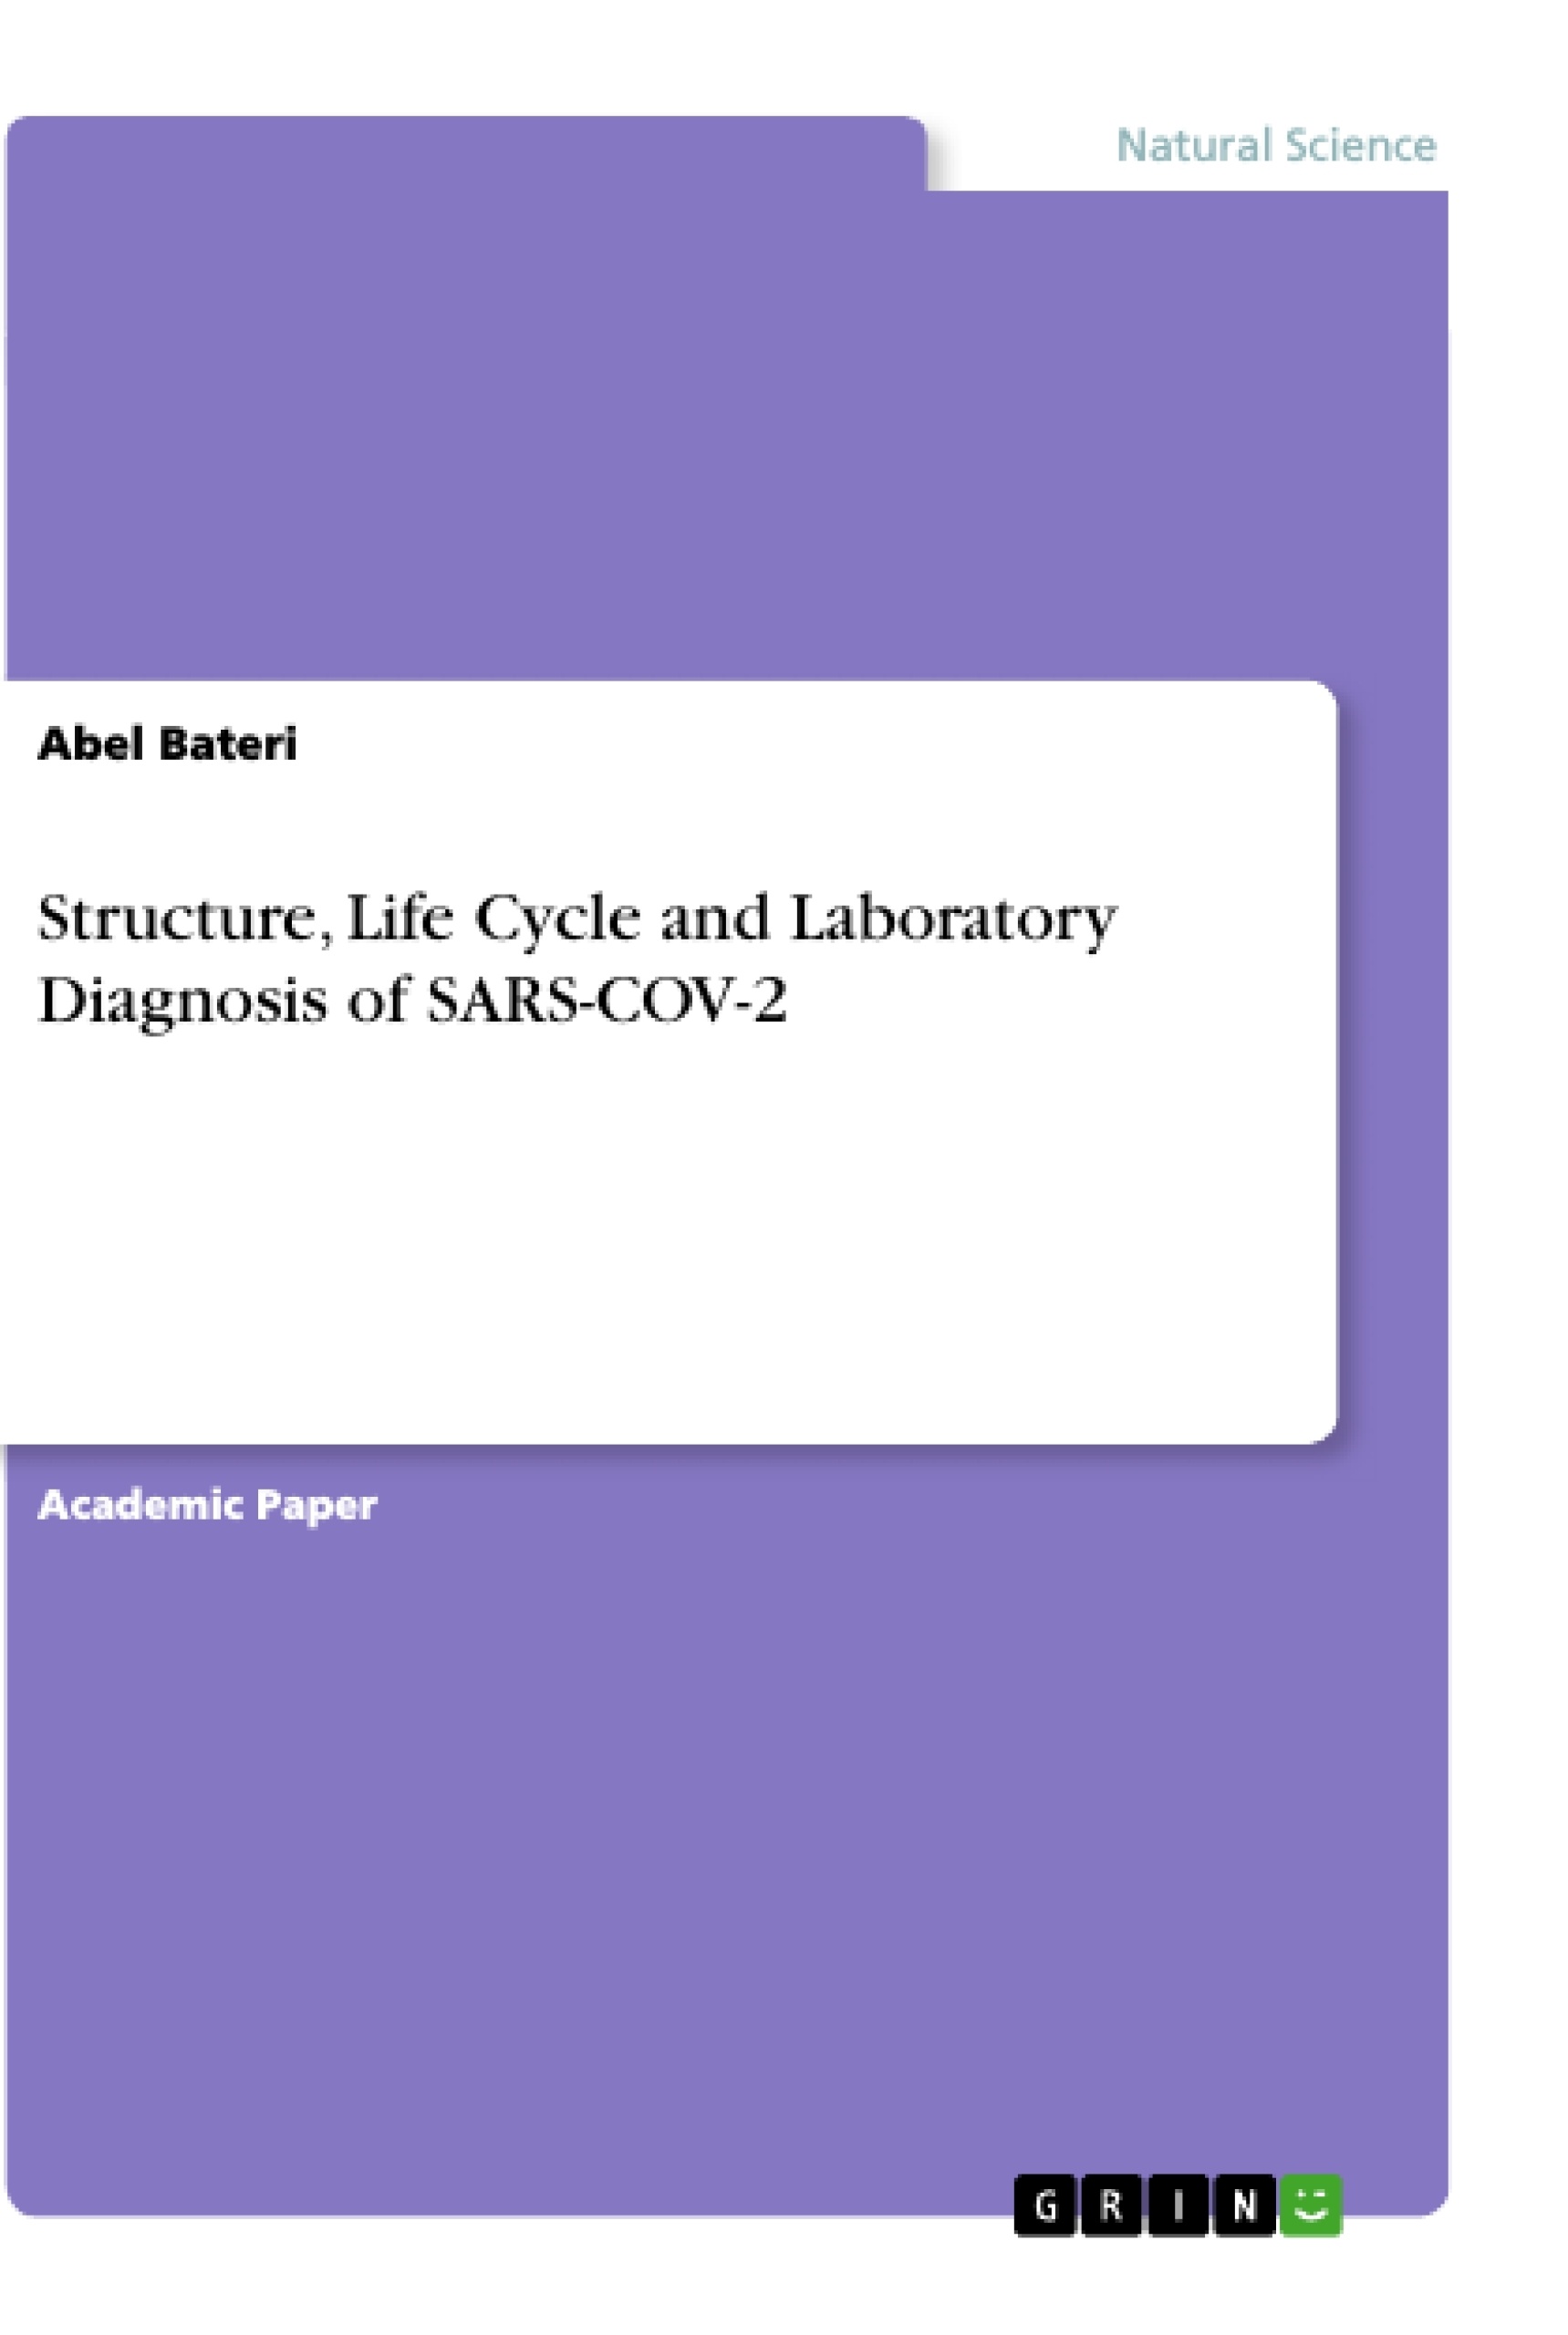 Titre: Structure, Life Cycle and Laboratory Diagnosis of SARS-COV-2